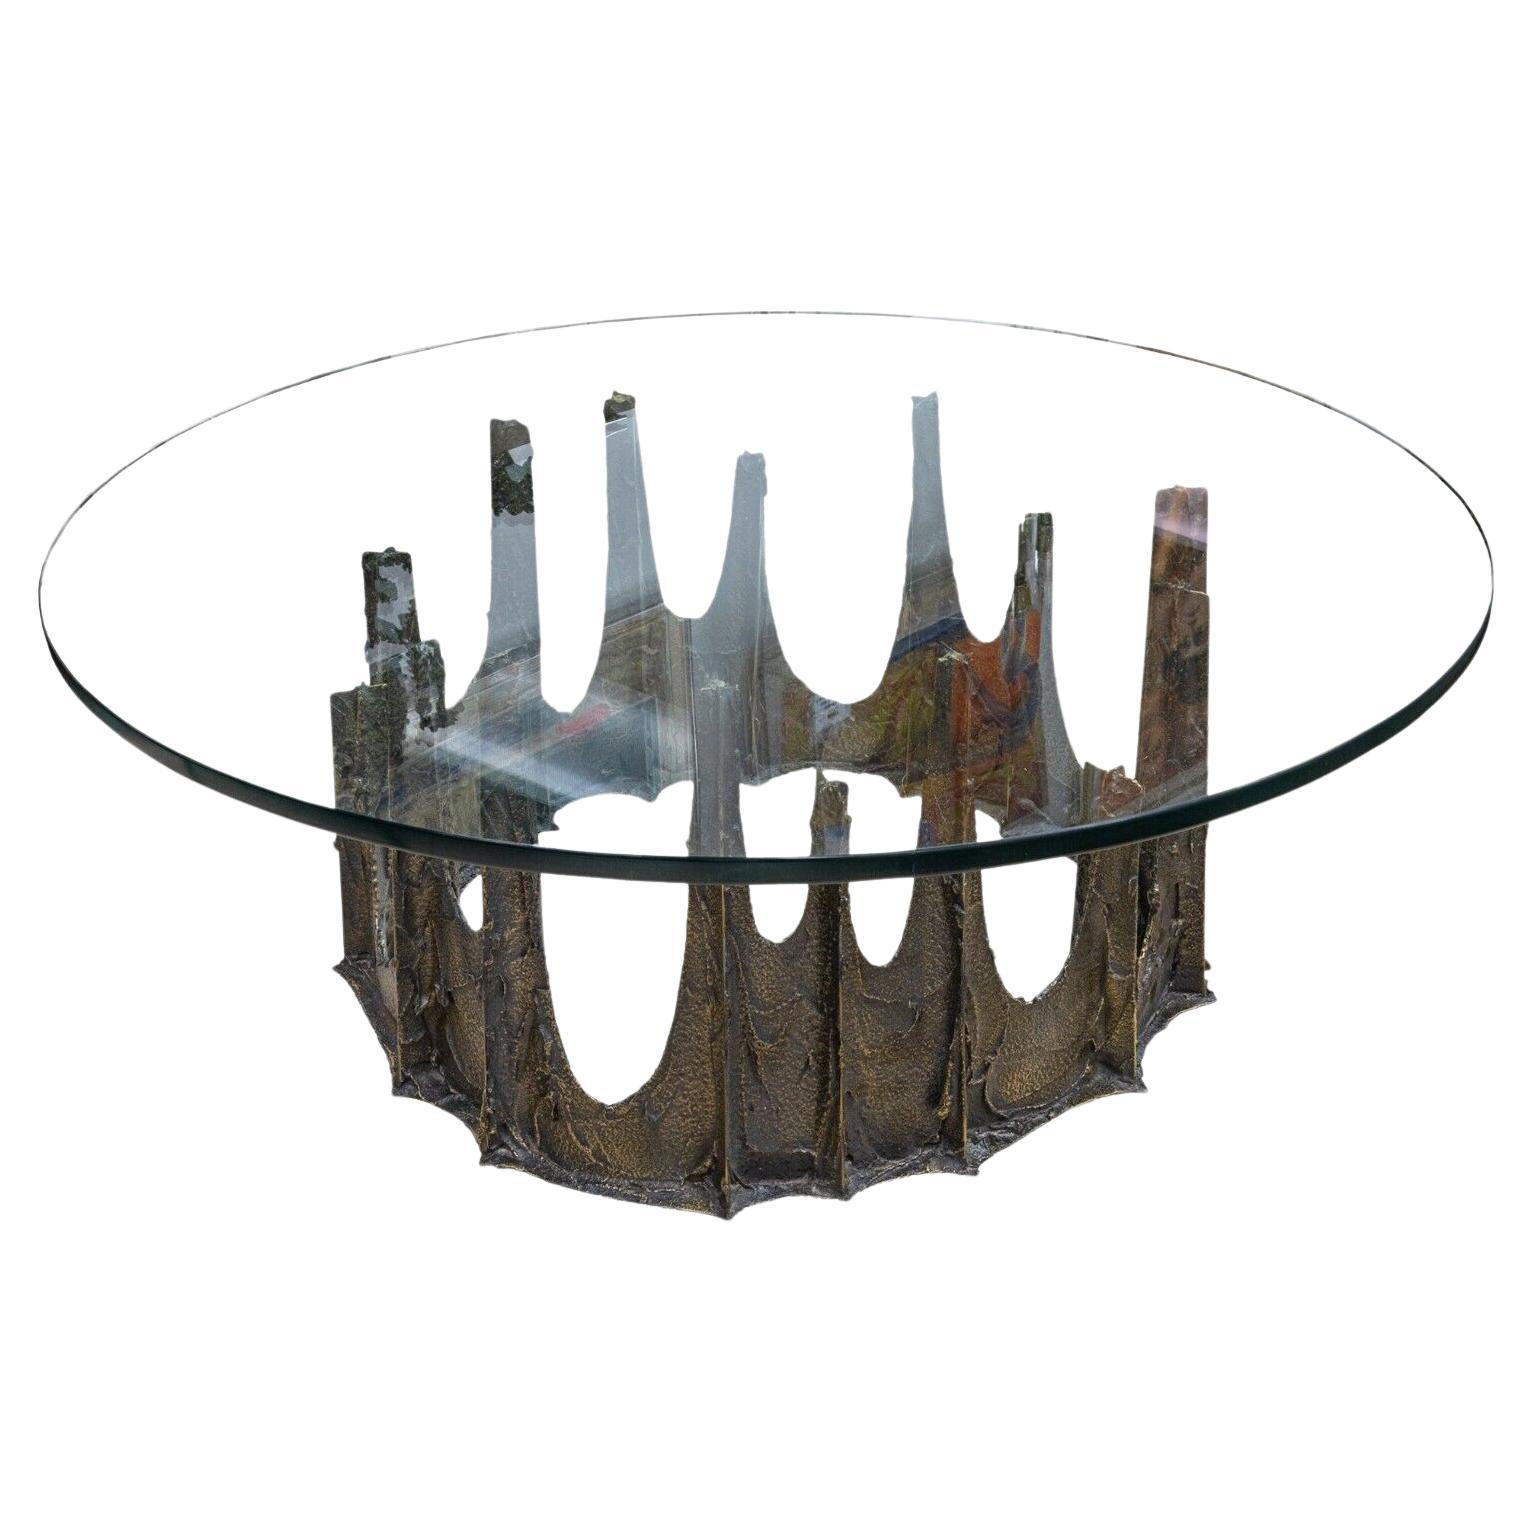 Paul Evans Brutalist MCM Stalagmite Coffee Table Signed and Dated PE 1973 For Sale